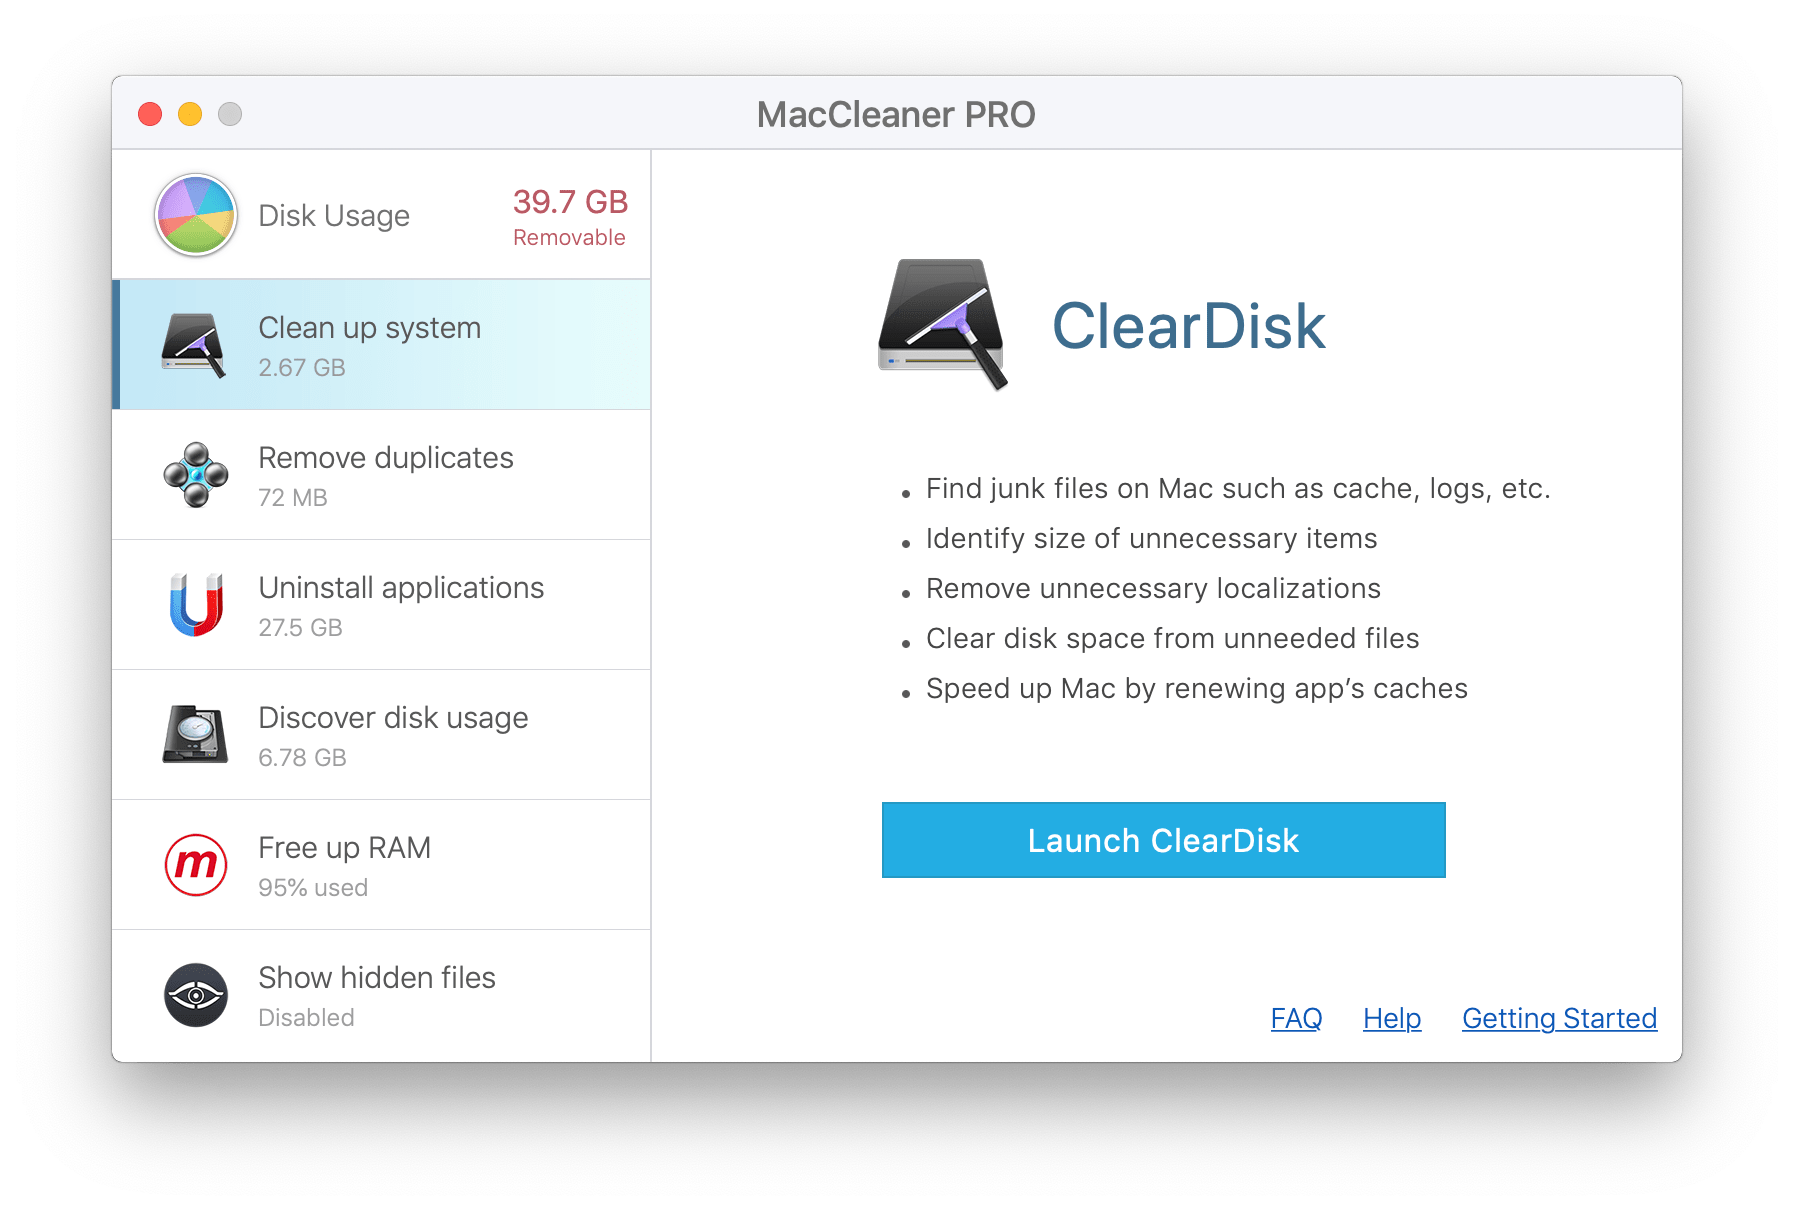 download the new version MacCleaner 3 PRO